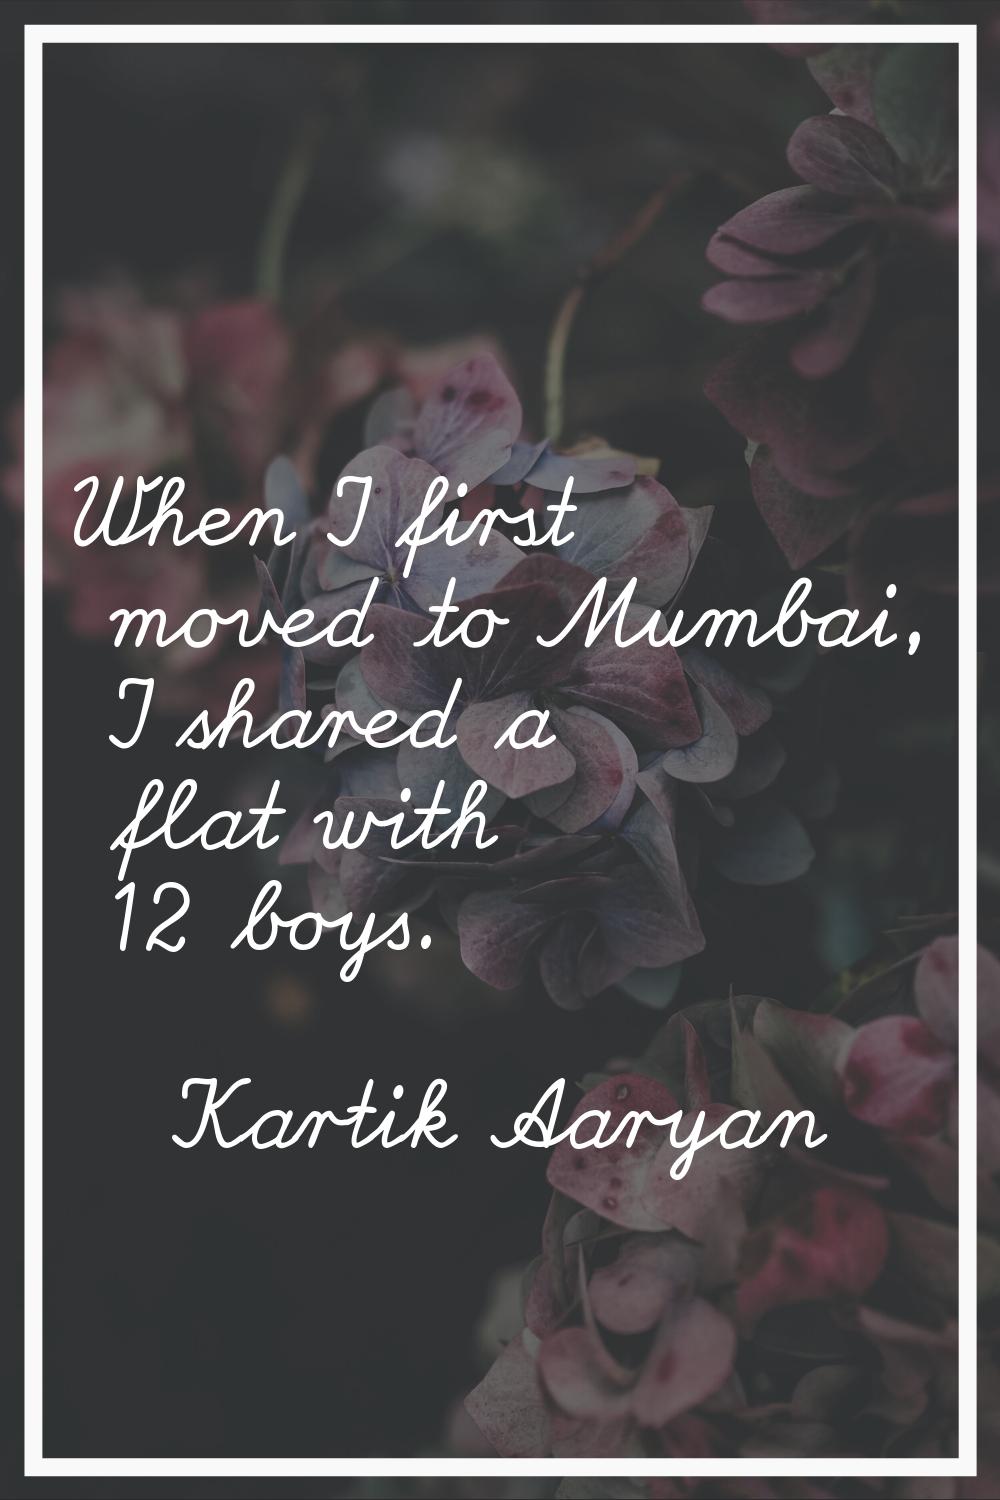 When I first moved to Mumbai, I shared a flat with 12 boys.